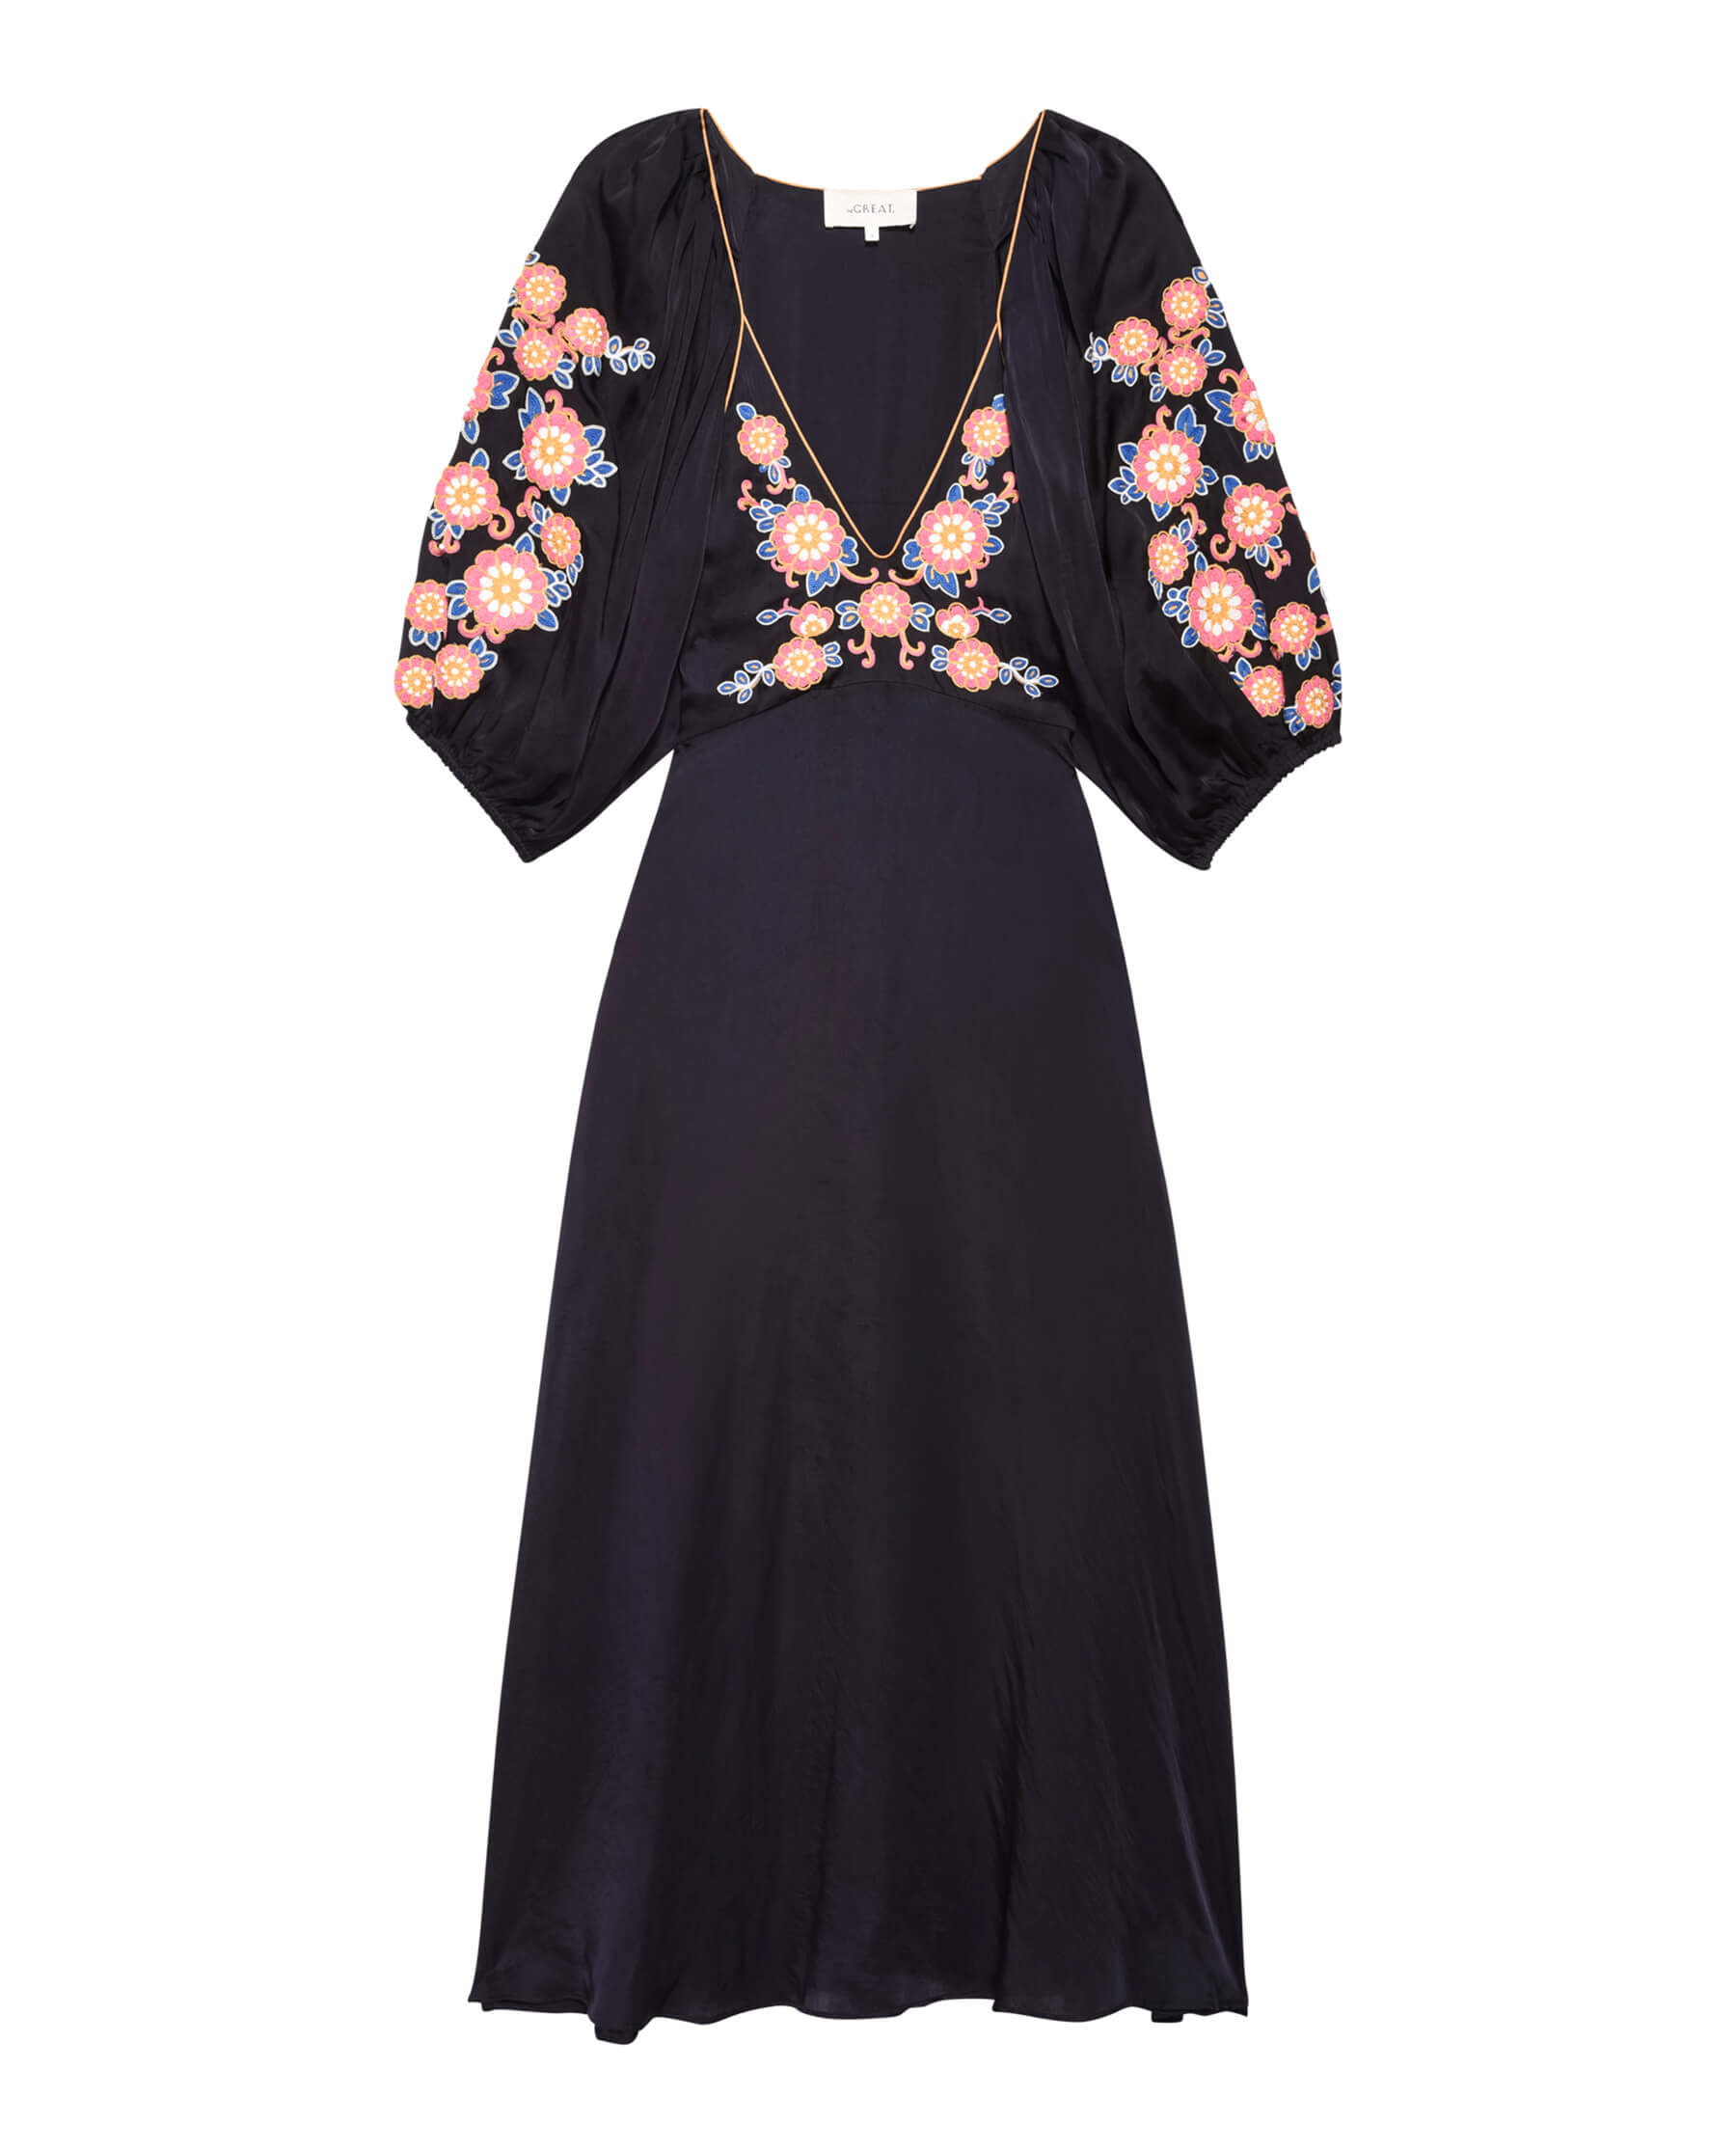 The Sagebrush Dress. -- Navy Country Floral Embroidery DRESSES THE GREAT. PS24 SALE